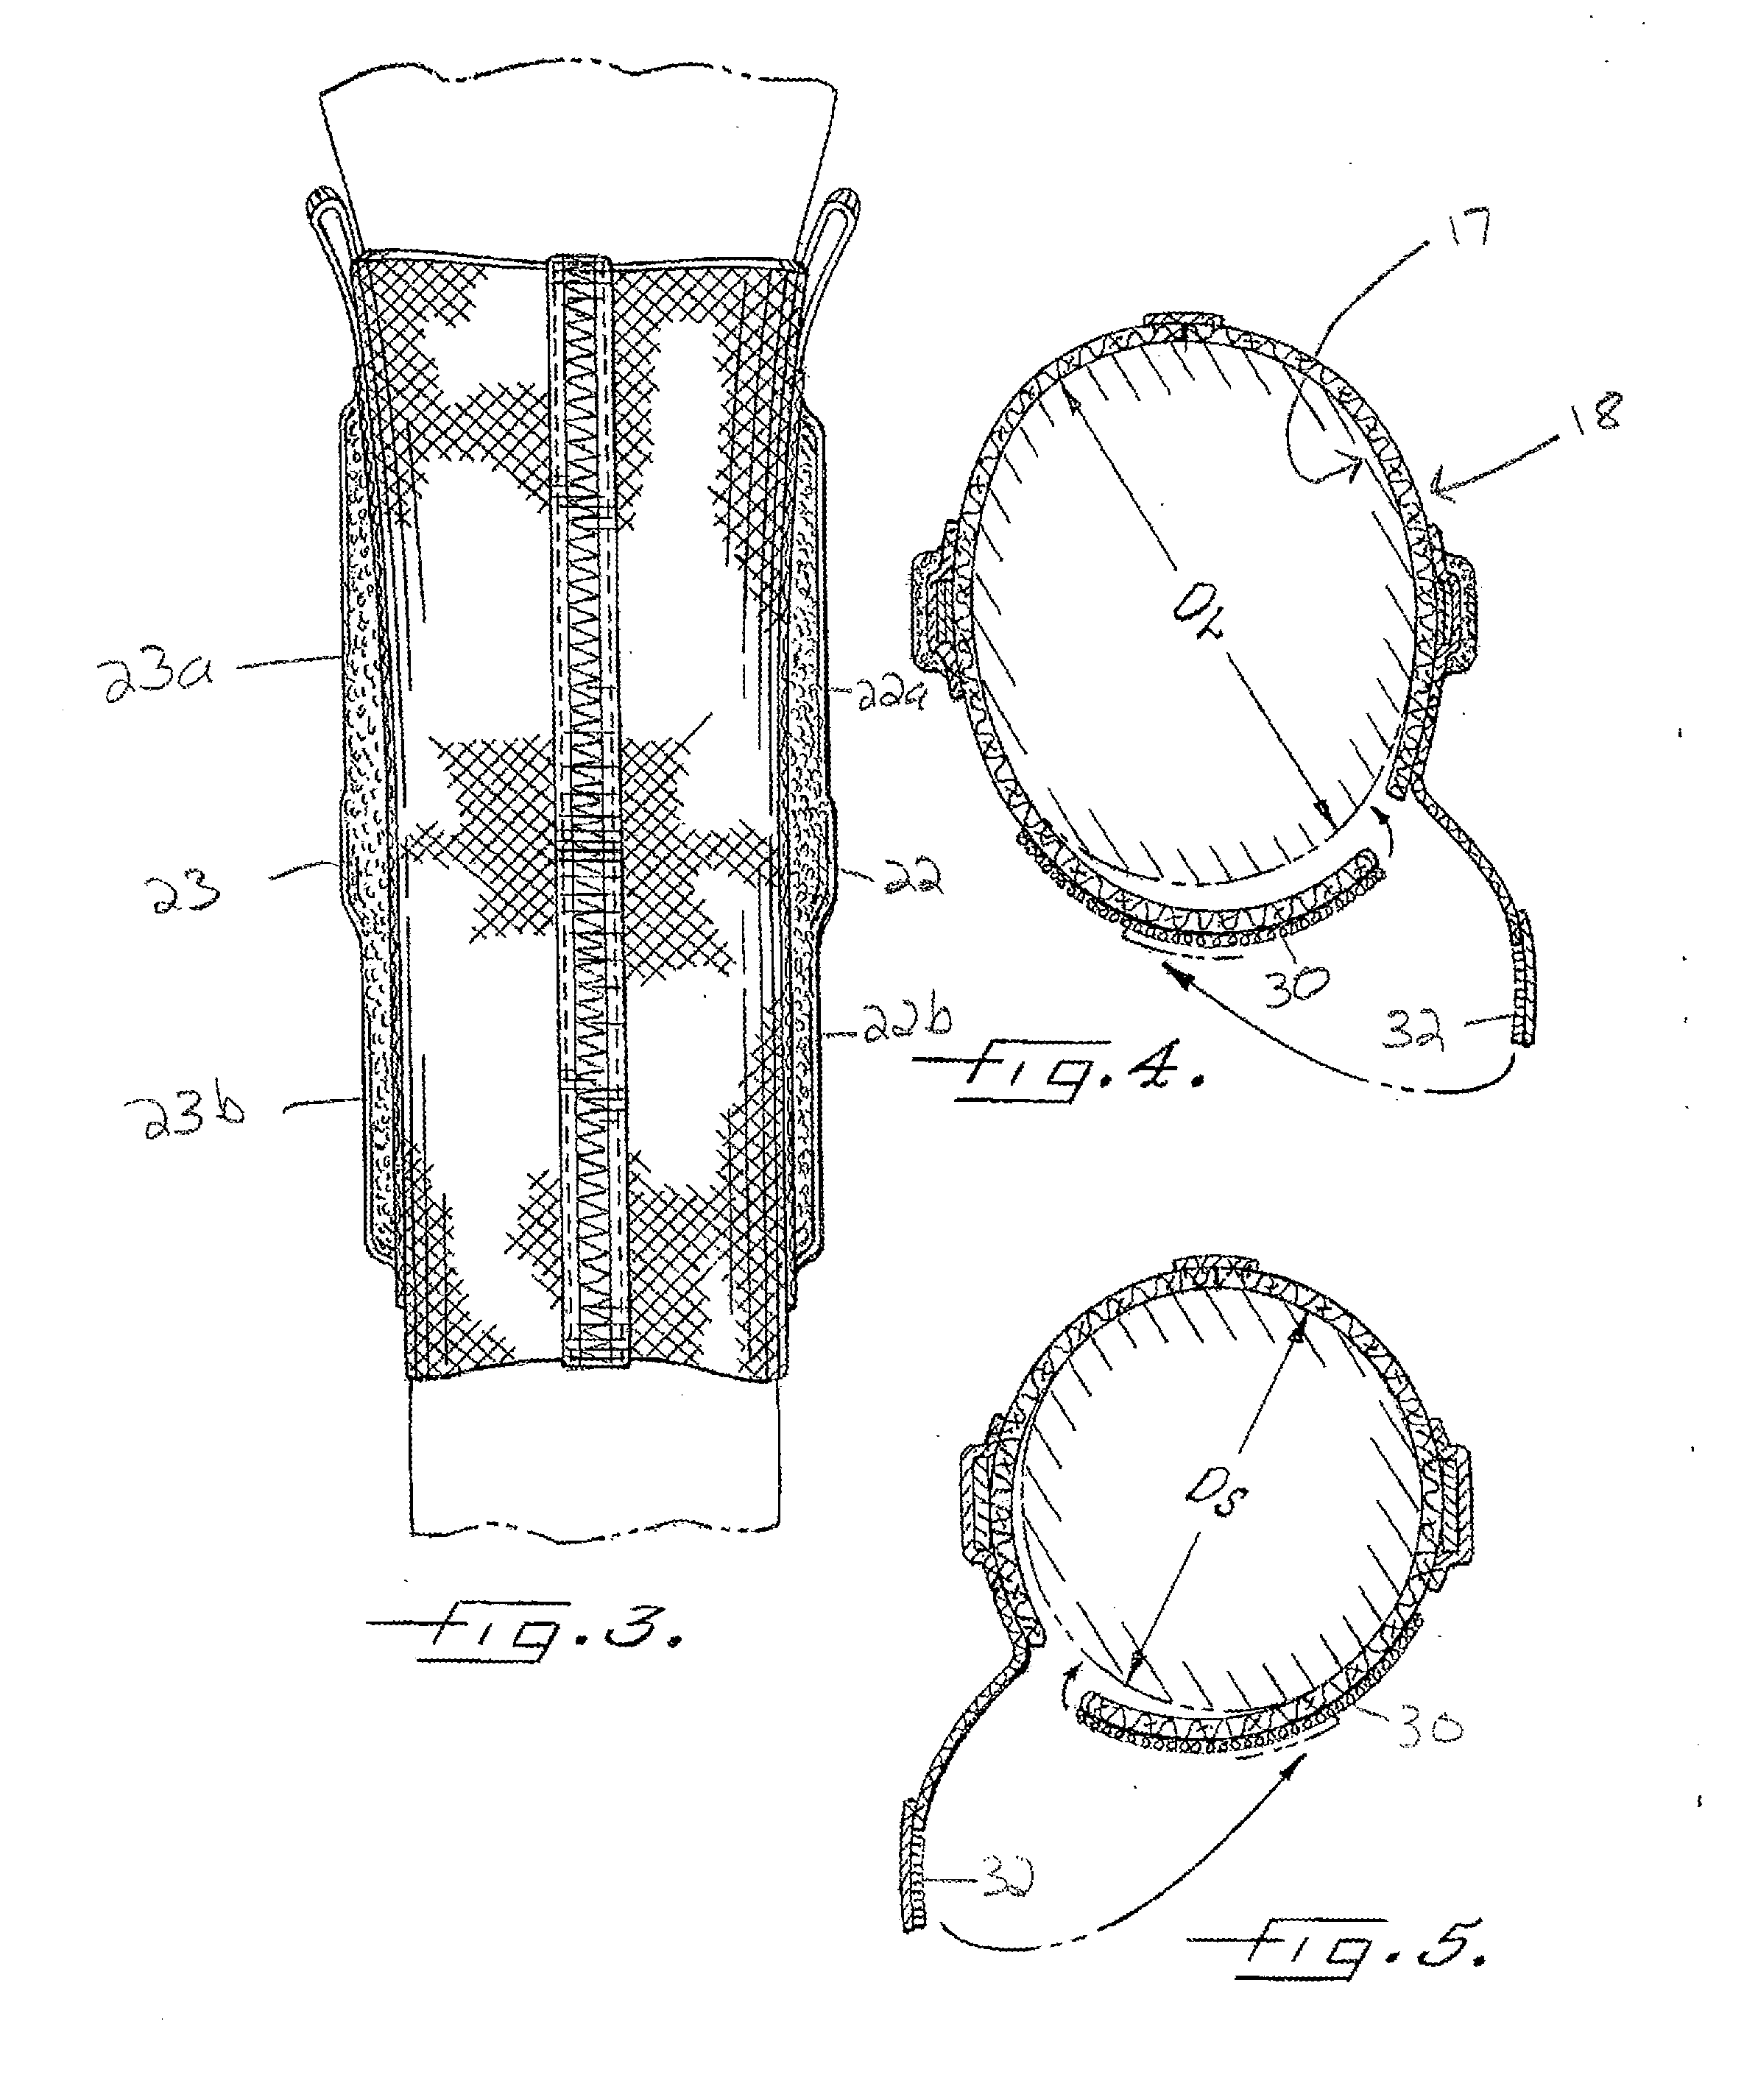 Knee support device having adjustable openings at opposing ends